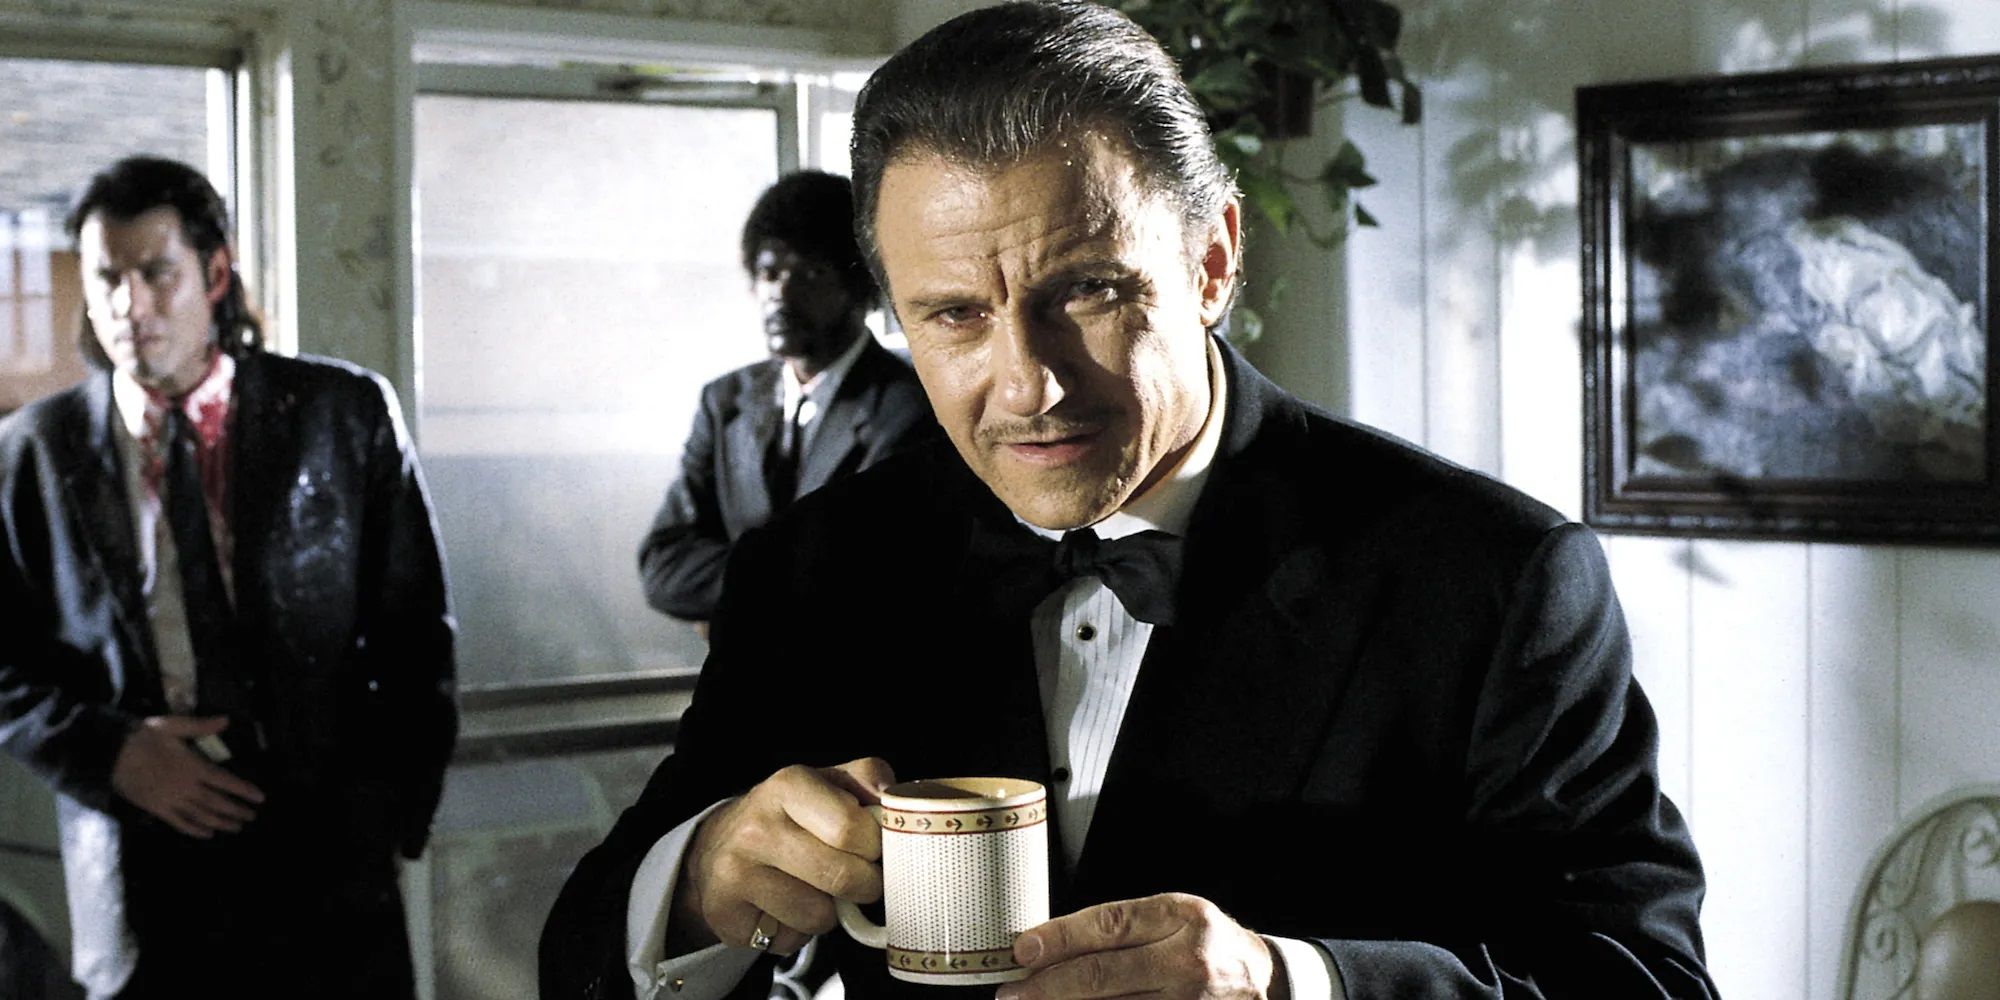 Winston Wolf drinks a coffee in Pulp Fiction